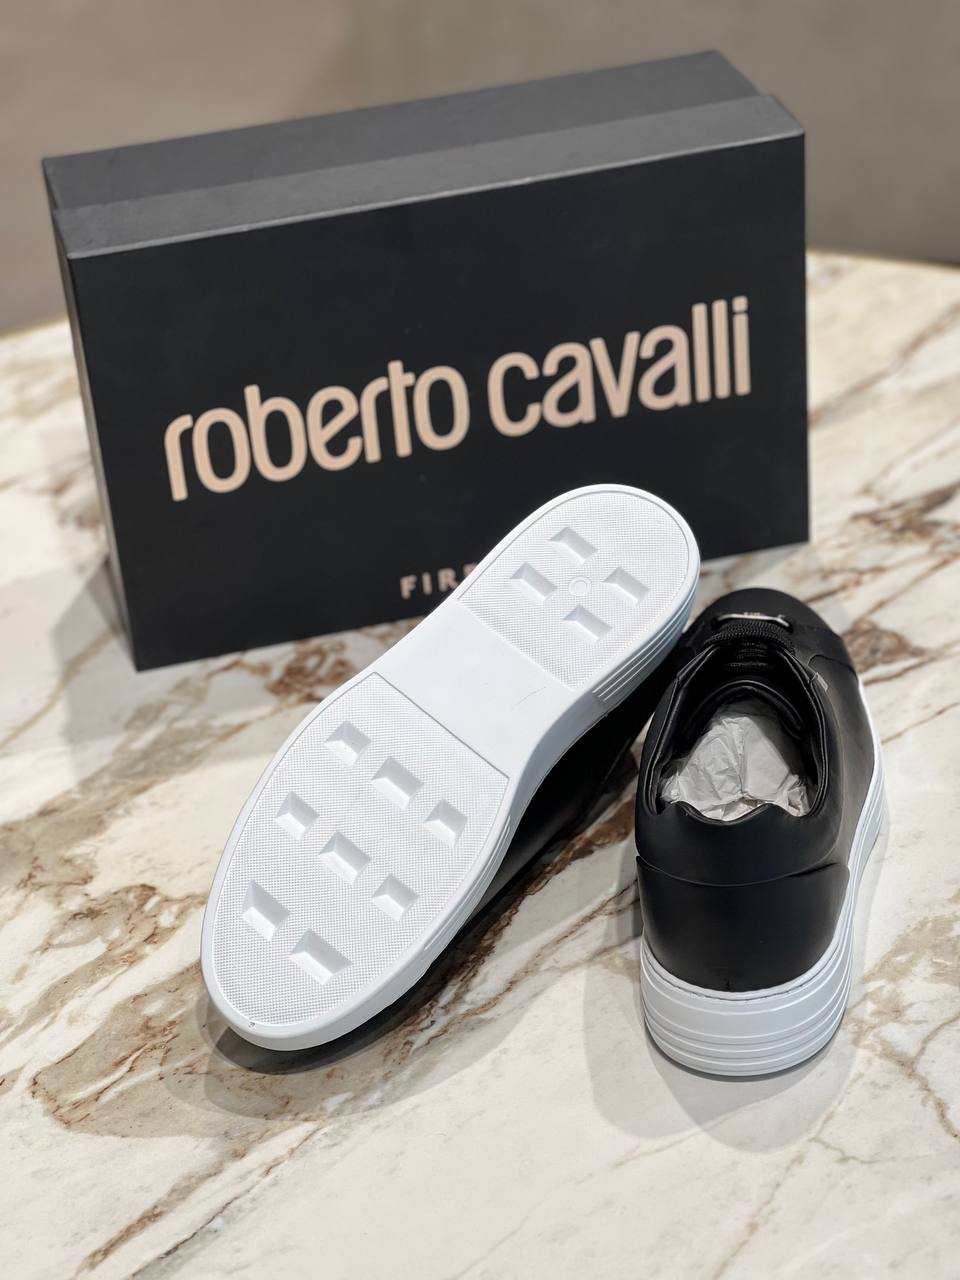 Roberto Cavalli Outlets 4688